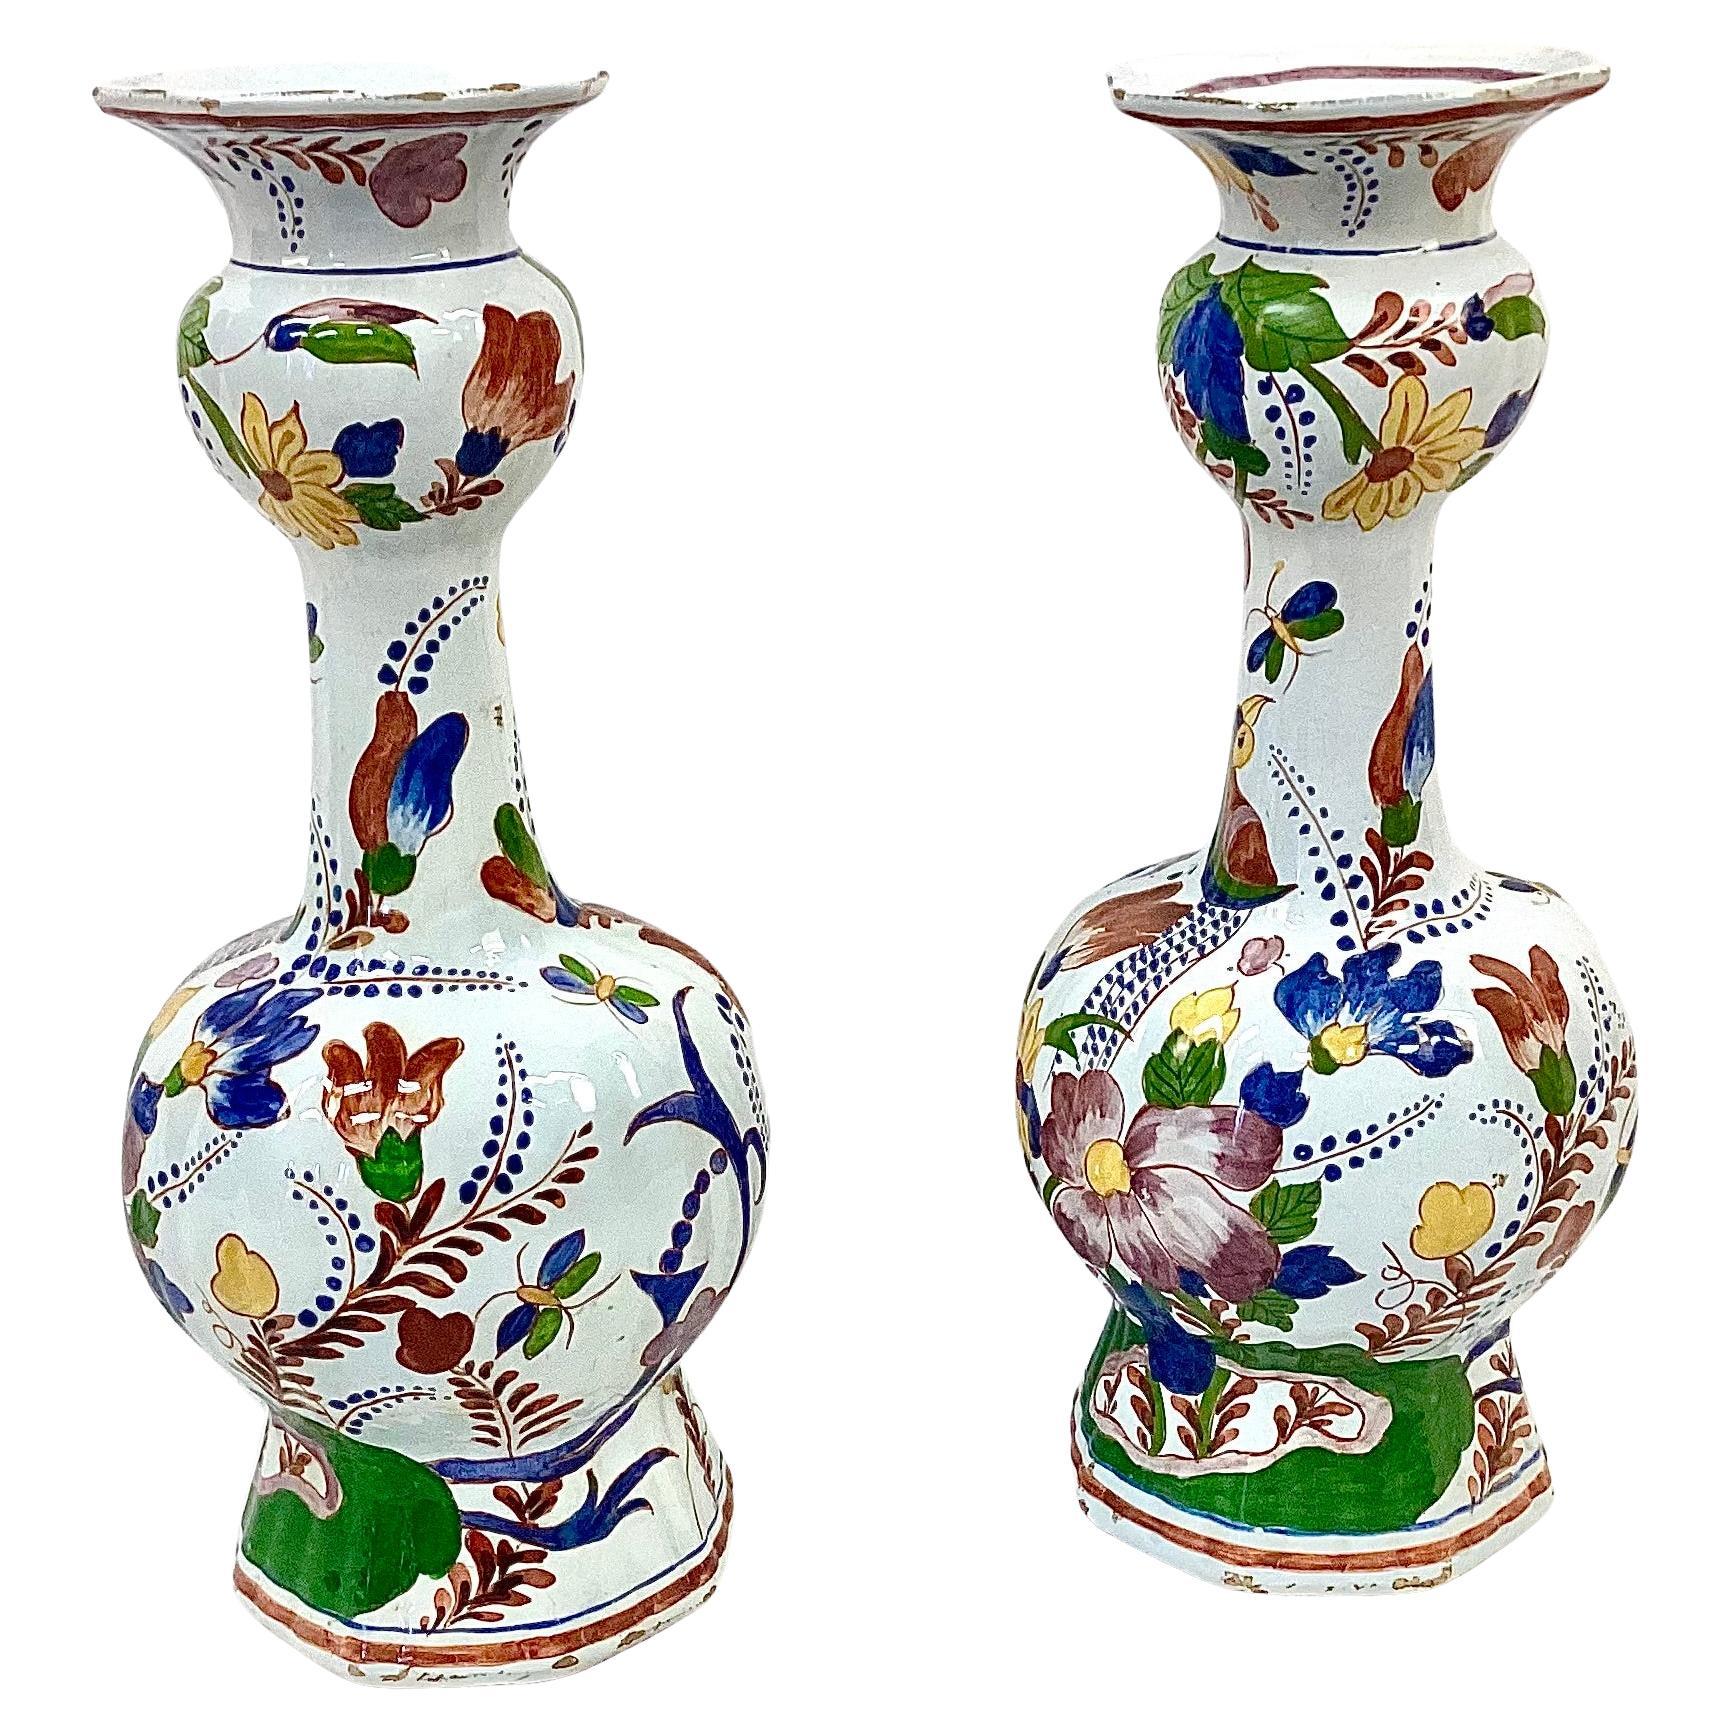 Large pair of hand painted Dutch Delft vases. Painted on the vases are birds, butterflies and florals in vivid colors of cobalt blue, green, yellow and pink on a white background. The mark of Wemmersz Hoppesteyn on the bottom